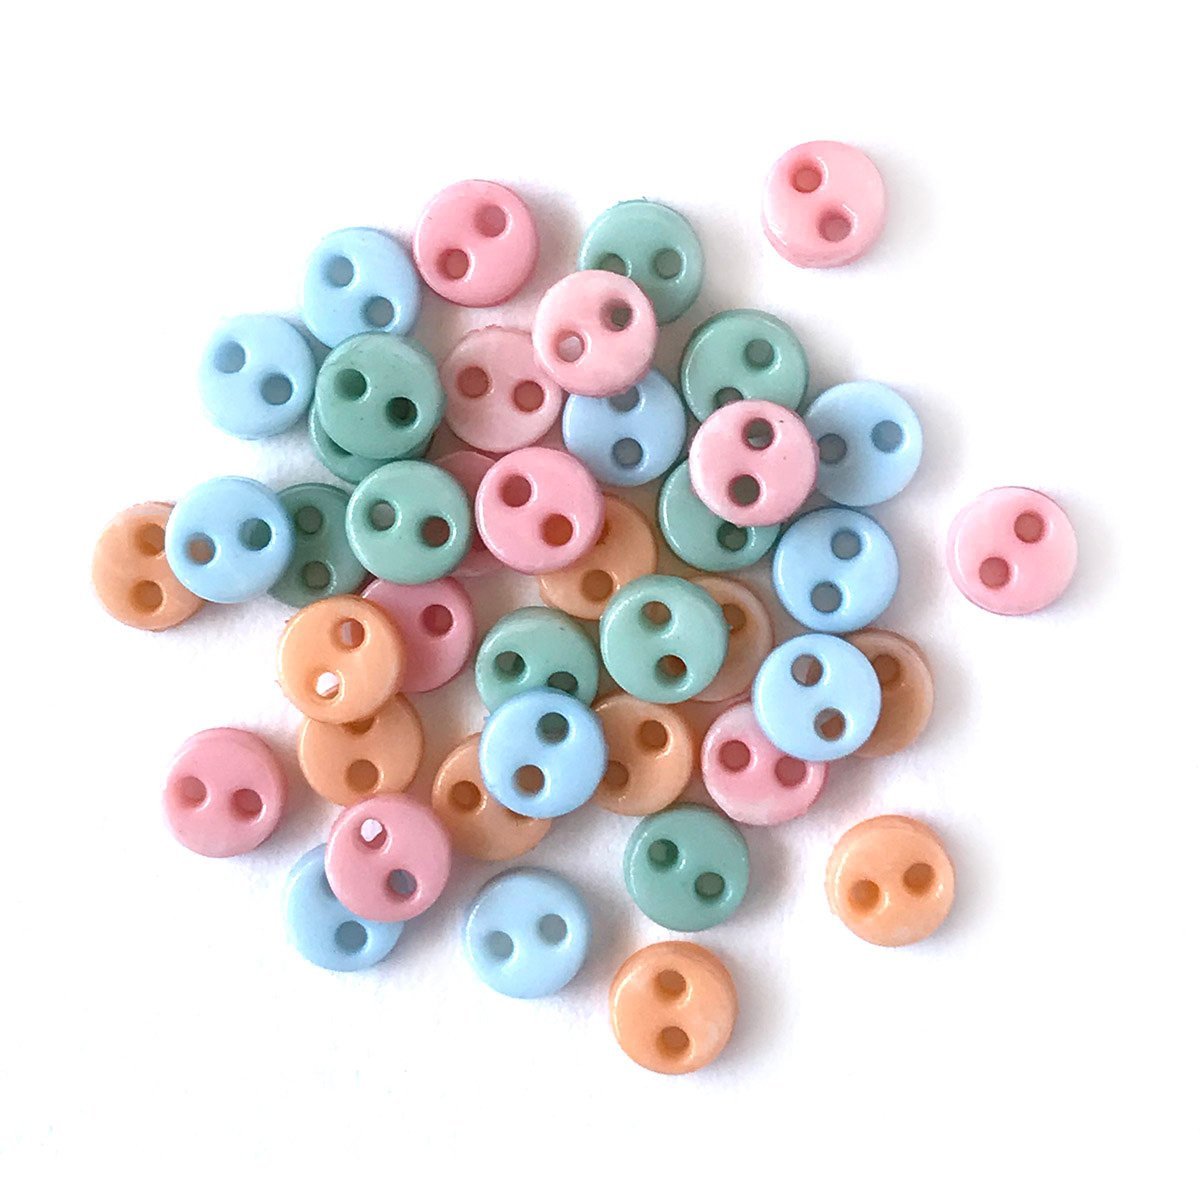 B125 Cute Paws Buttons 5mm Micro Mini Buttons Flower Buttons Tiny